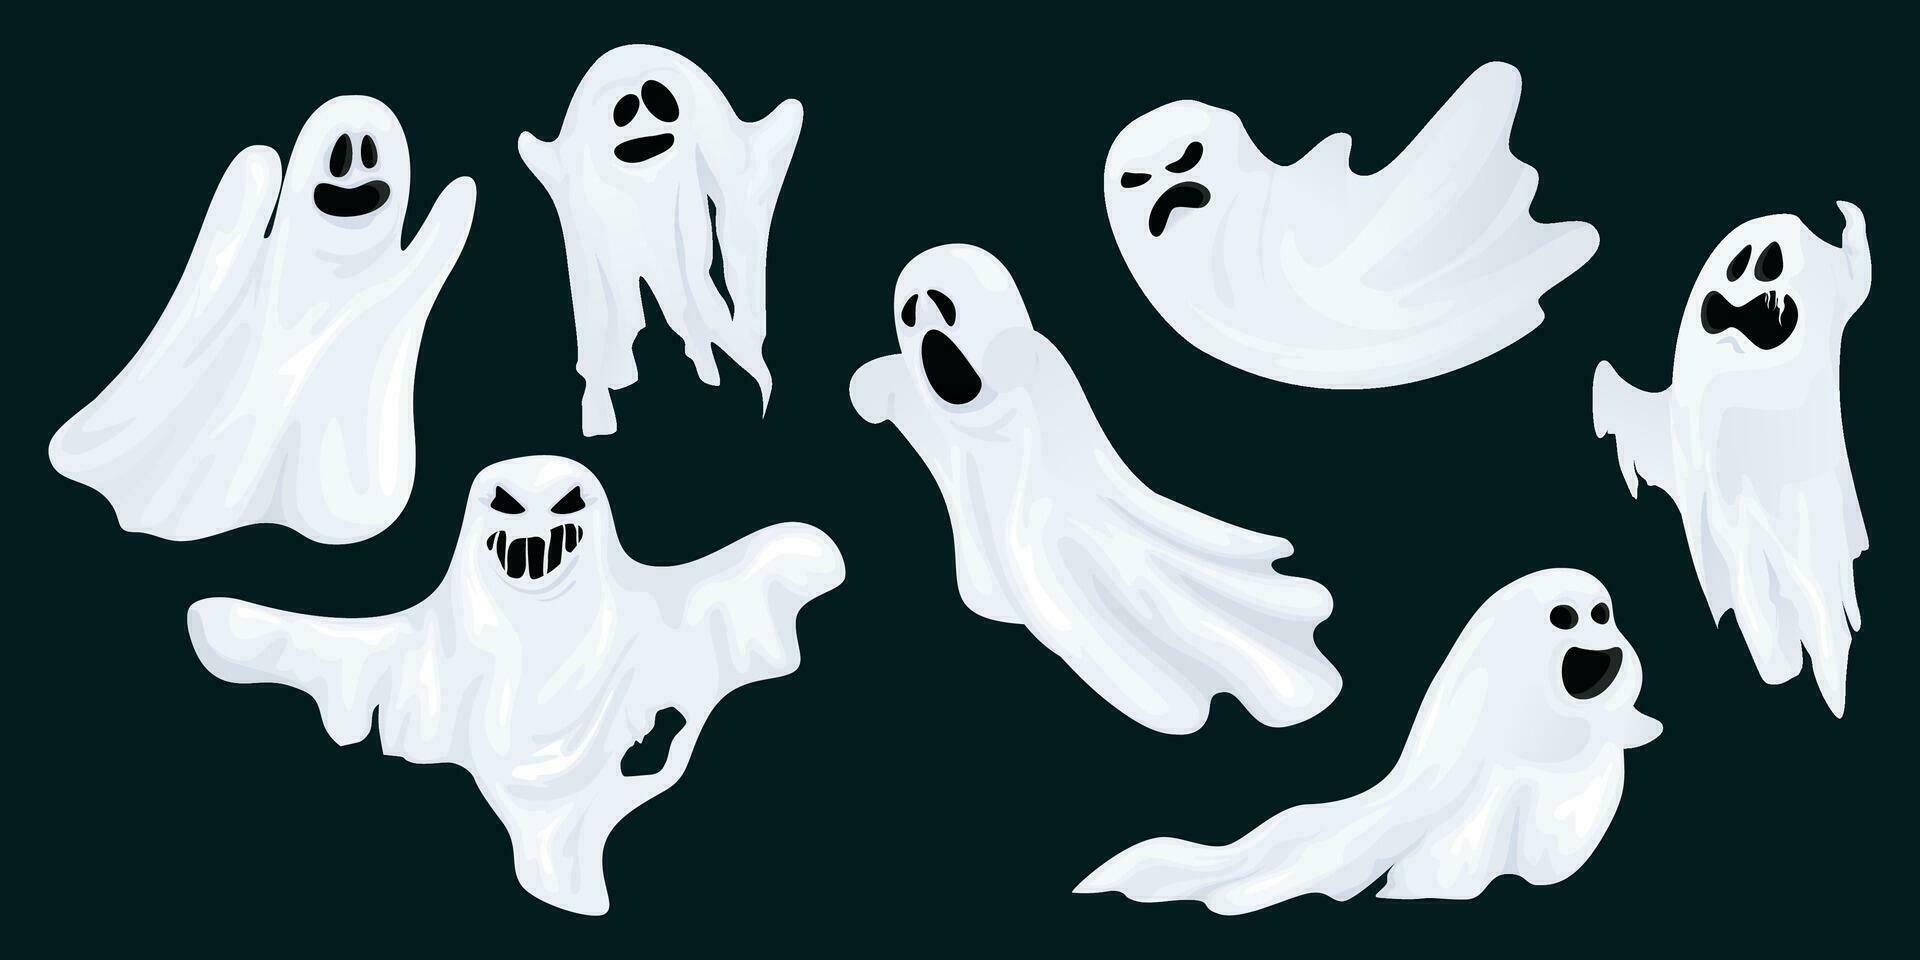 Ghost scares horror character set. Cute funny boo, ghost leaf halloween character design. Isolated vector illustration.